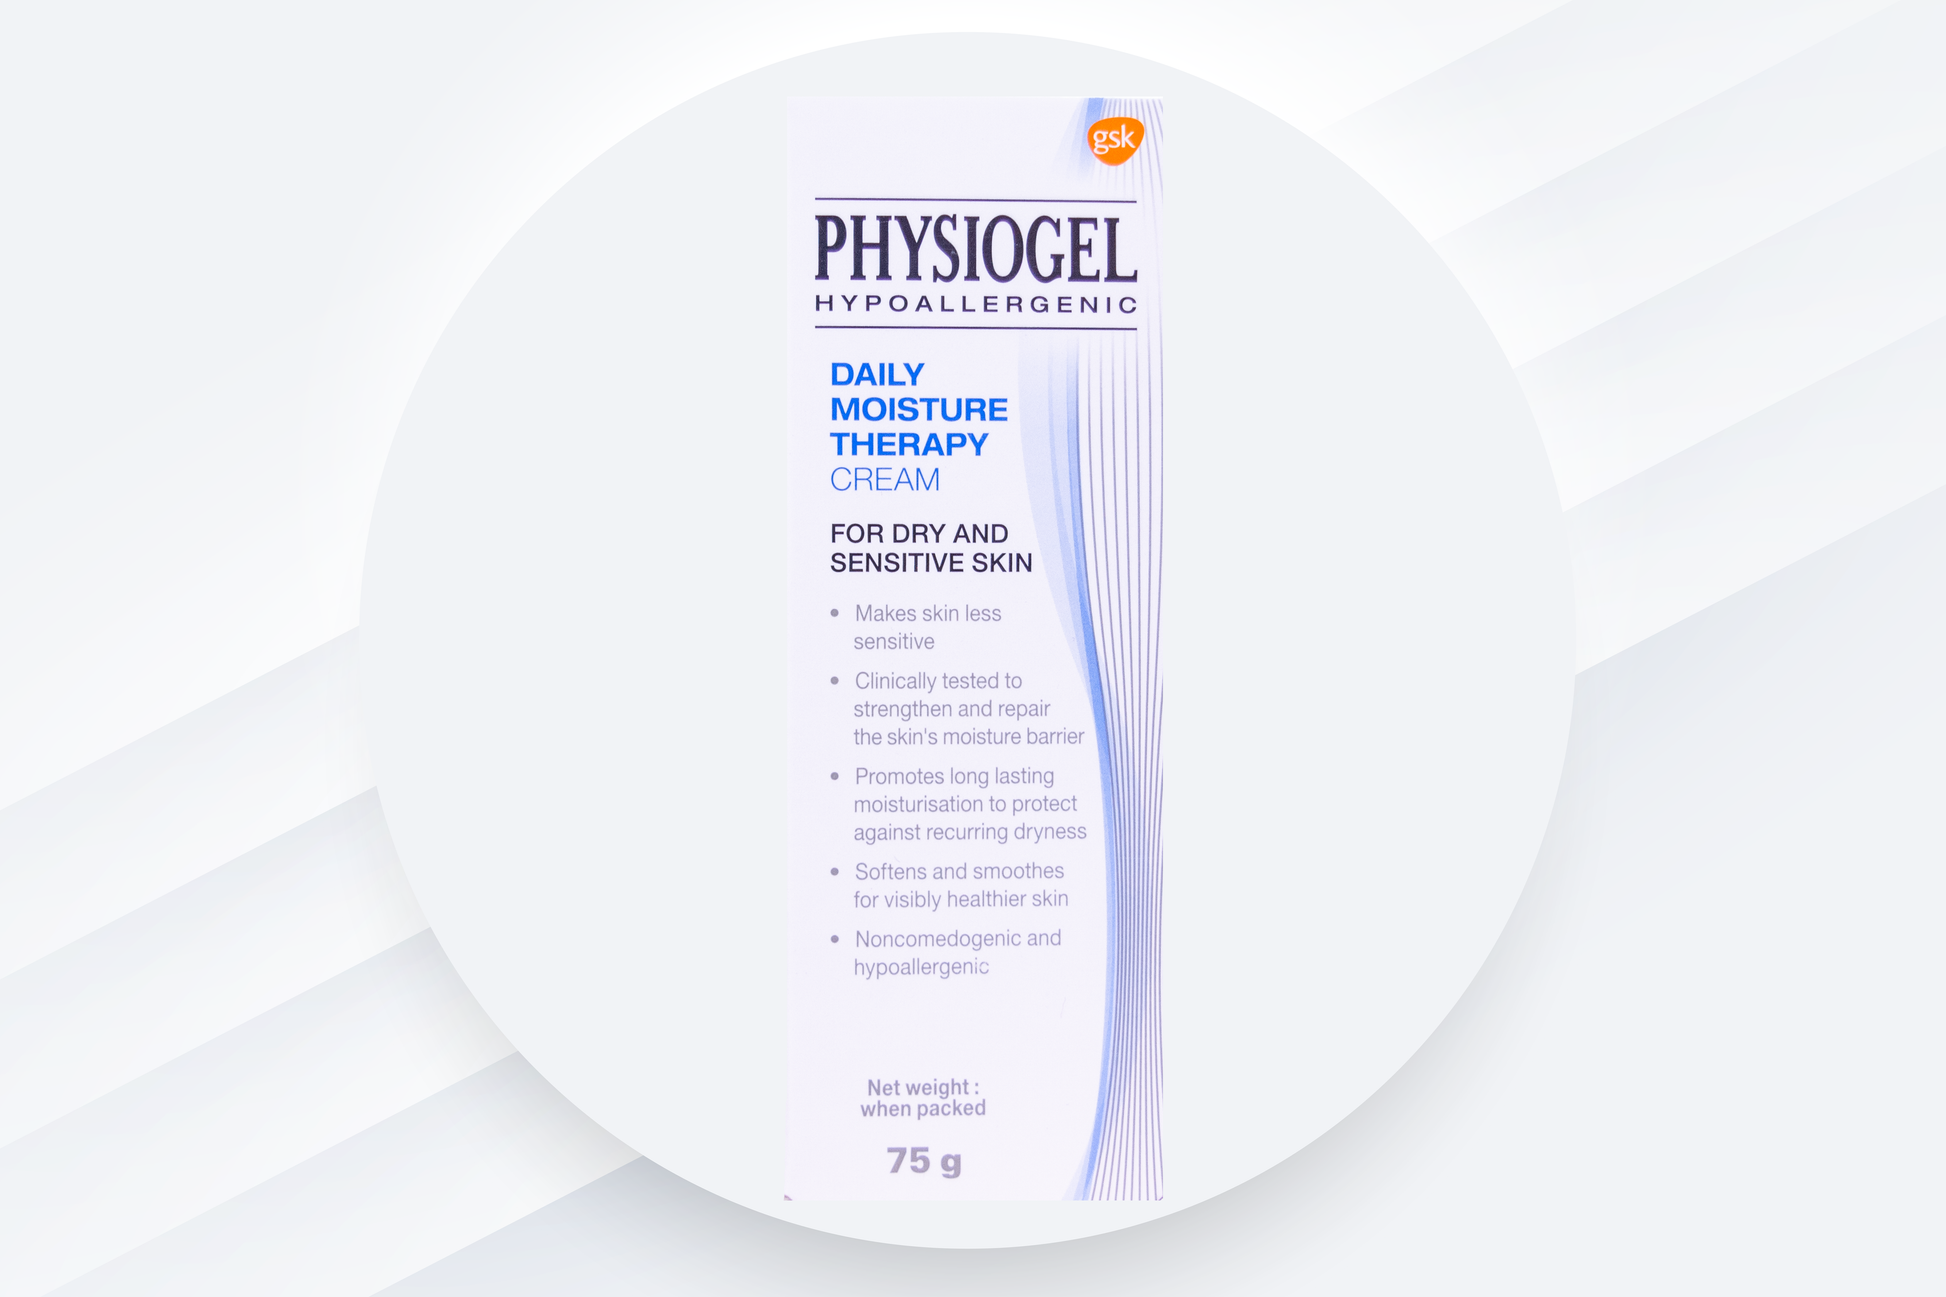 Physiogel-Hypoallergenic-Daily-Moisture-Therapy-Cream-clintry